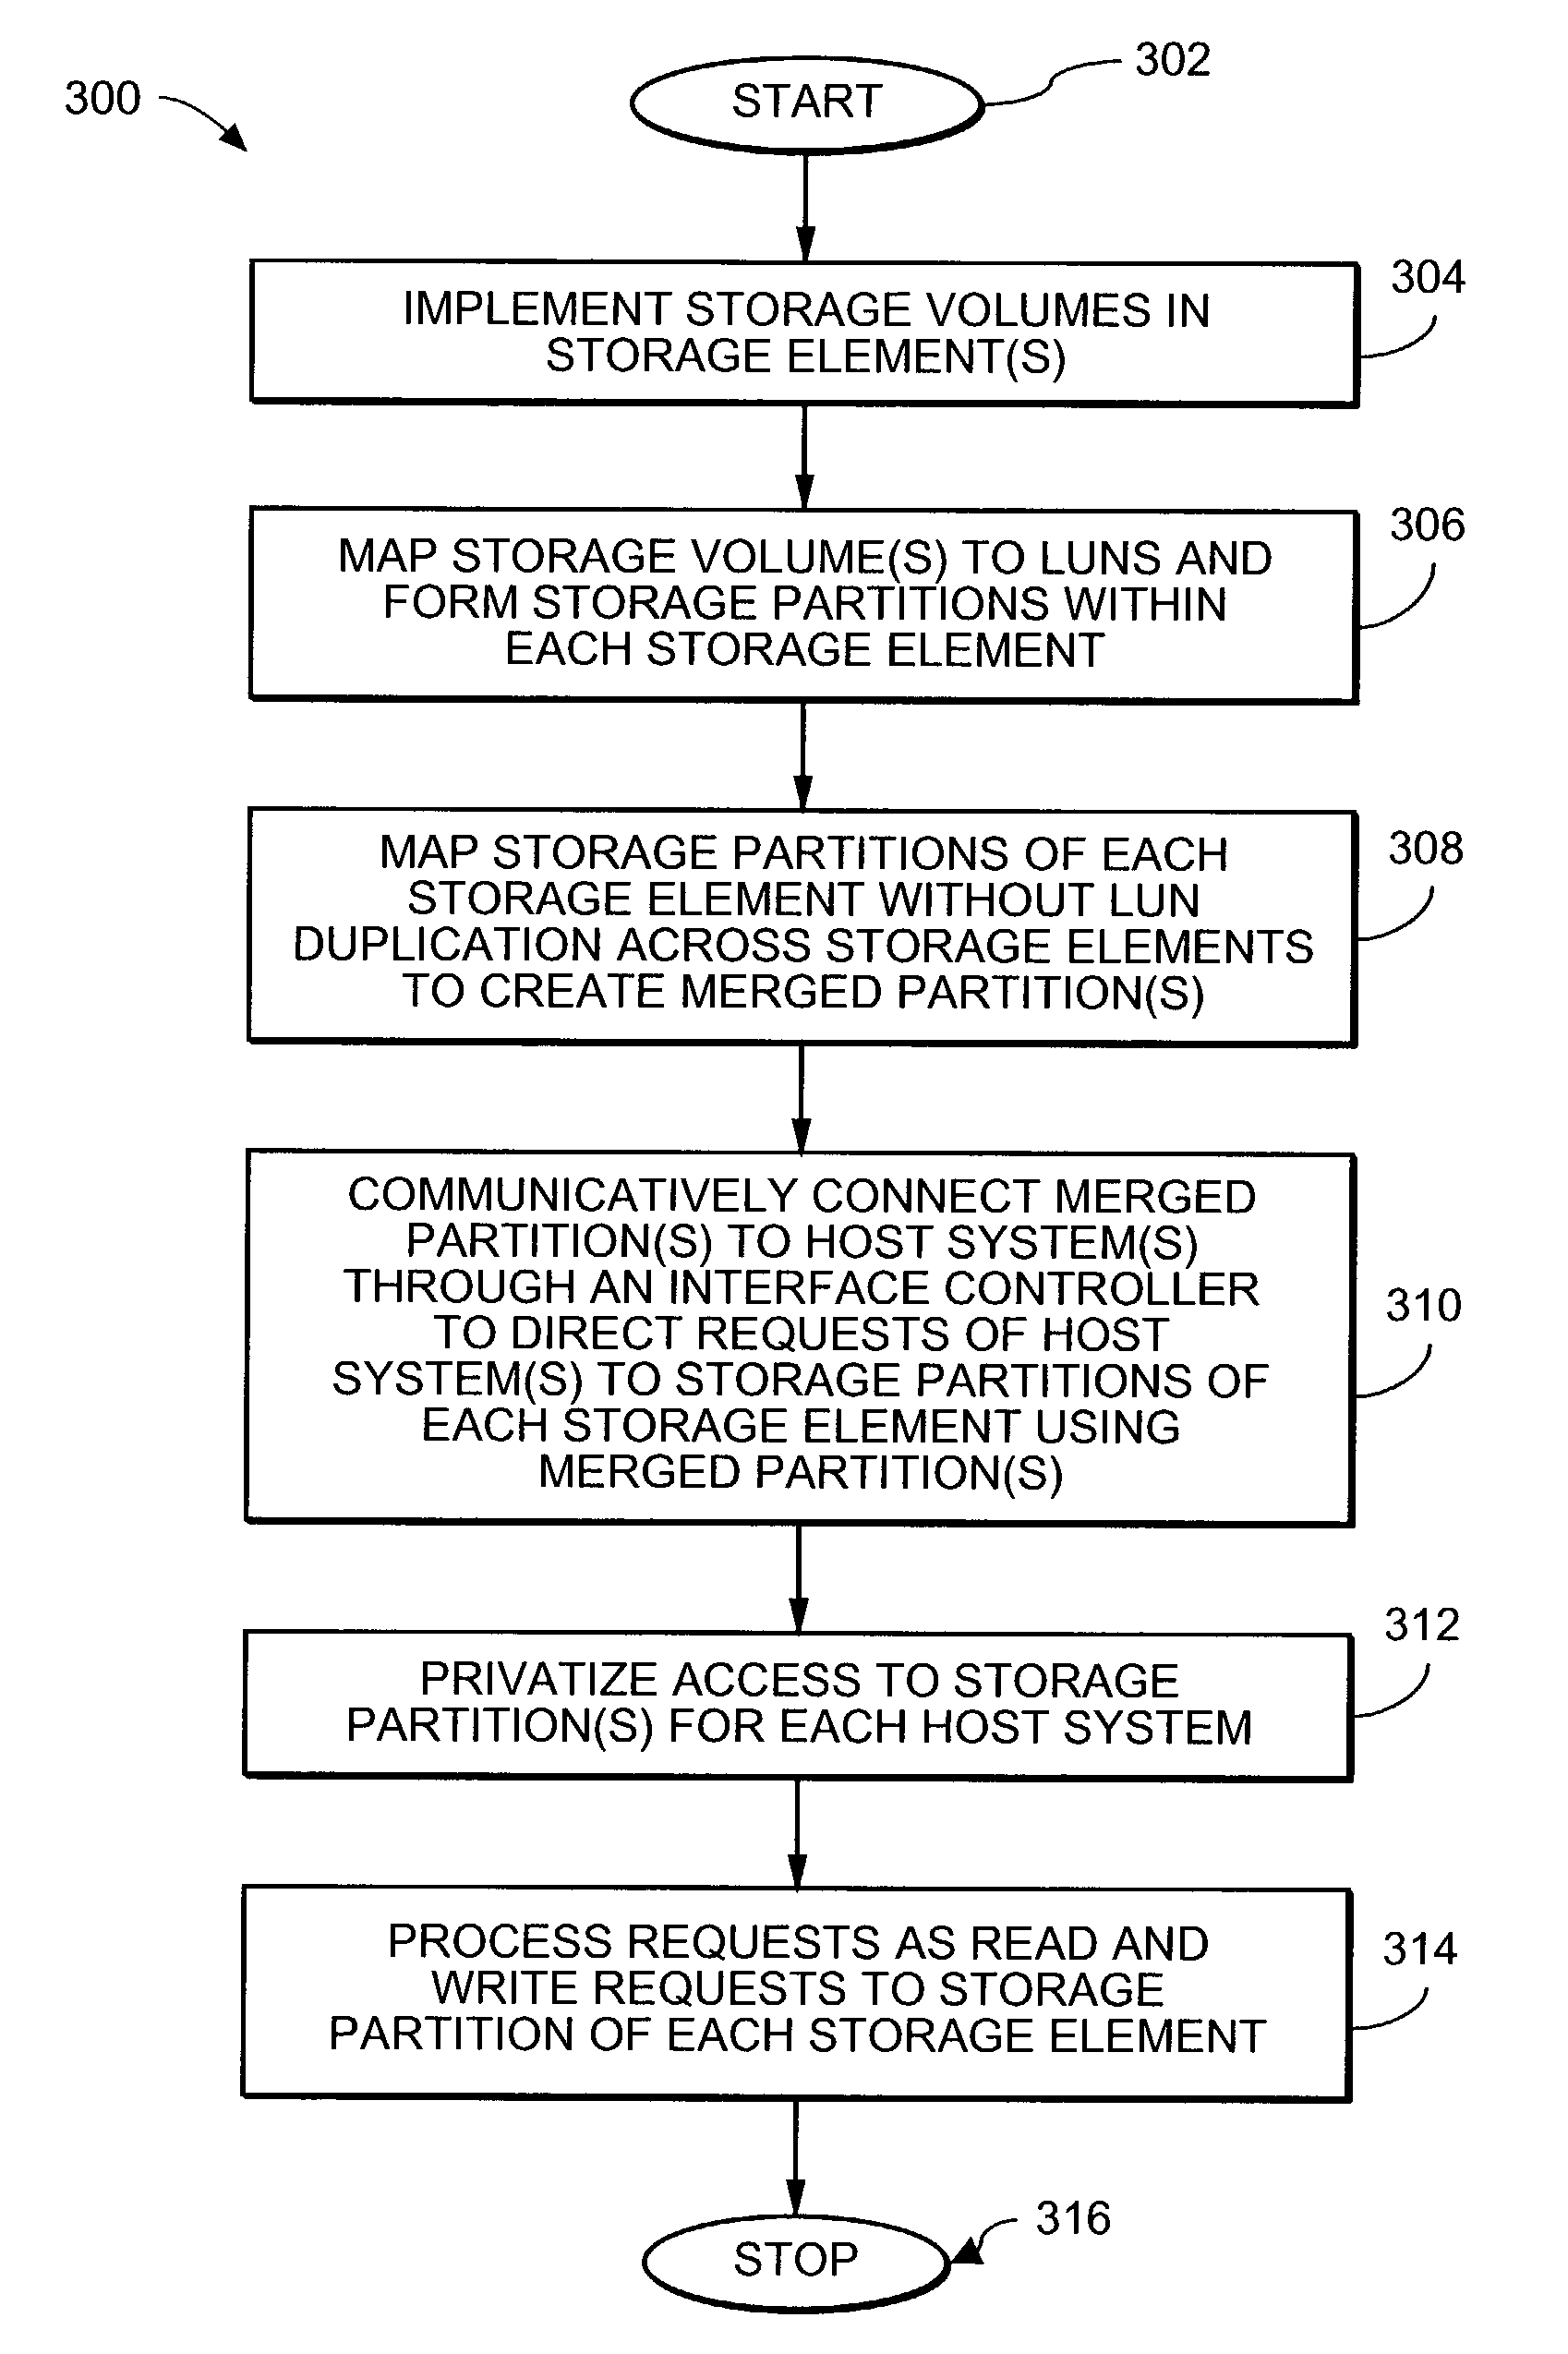 Method and apparatus for mapping storage partitions of storage elements to host systems